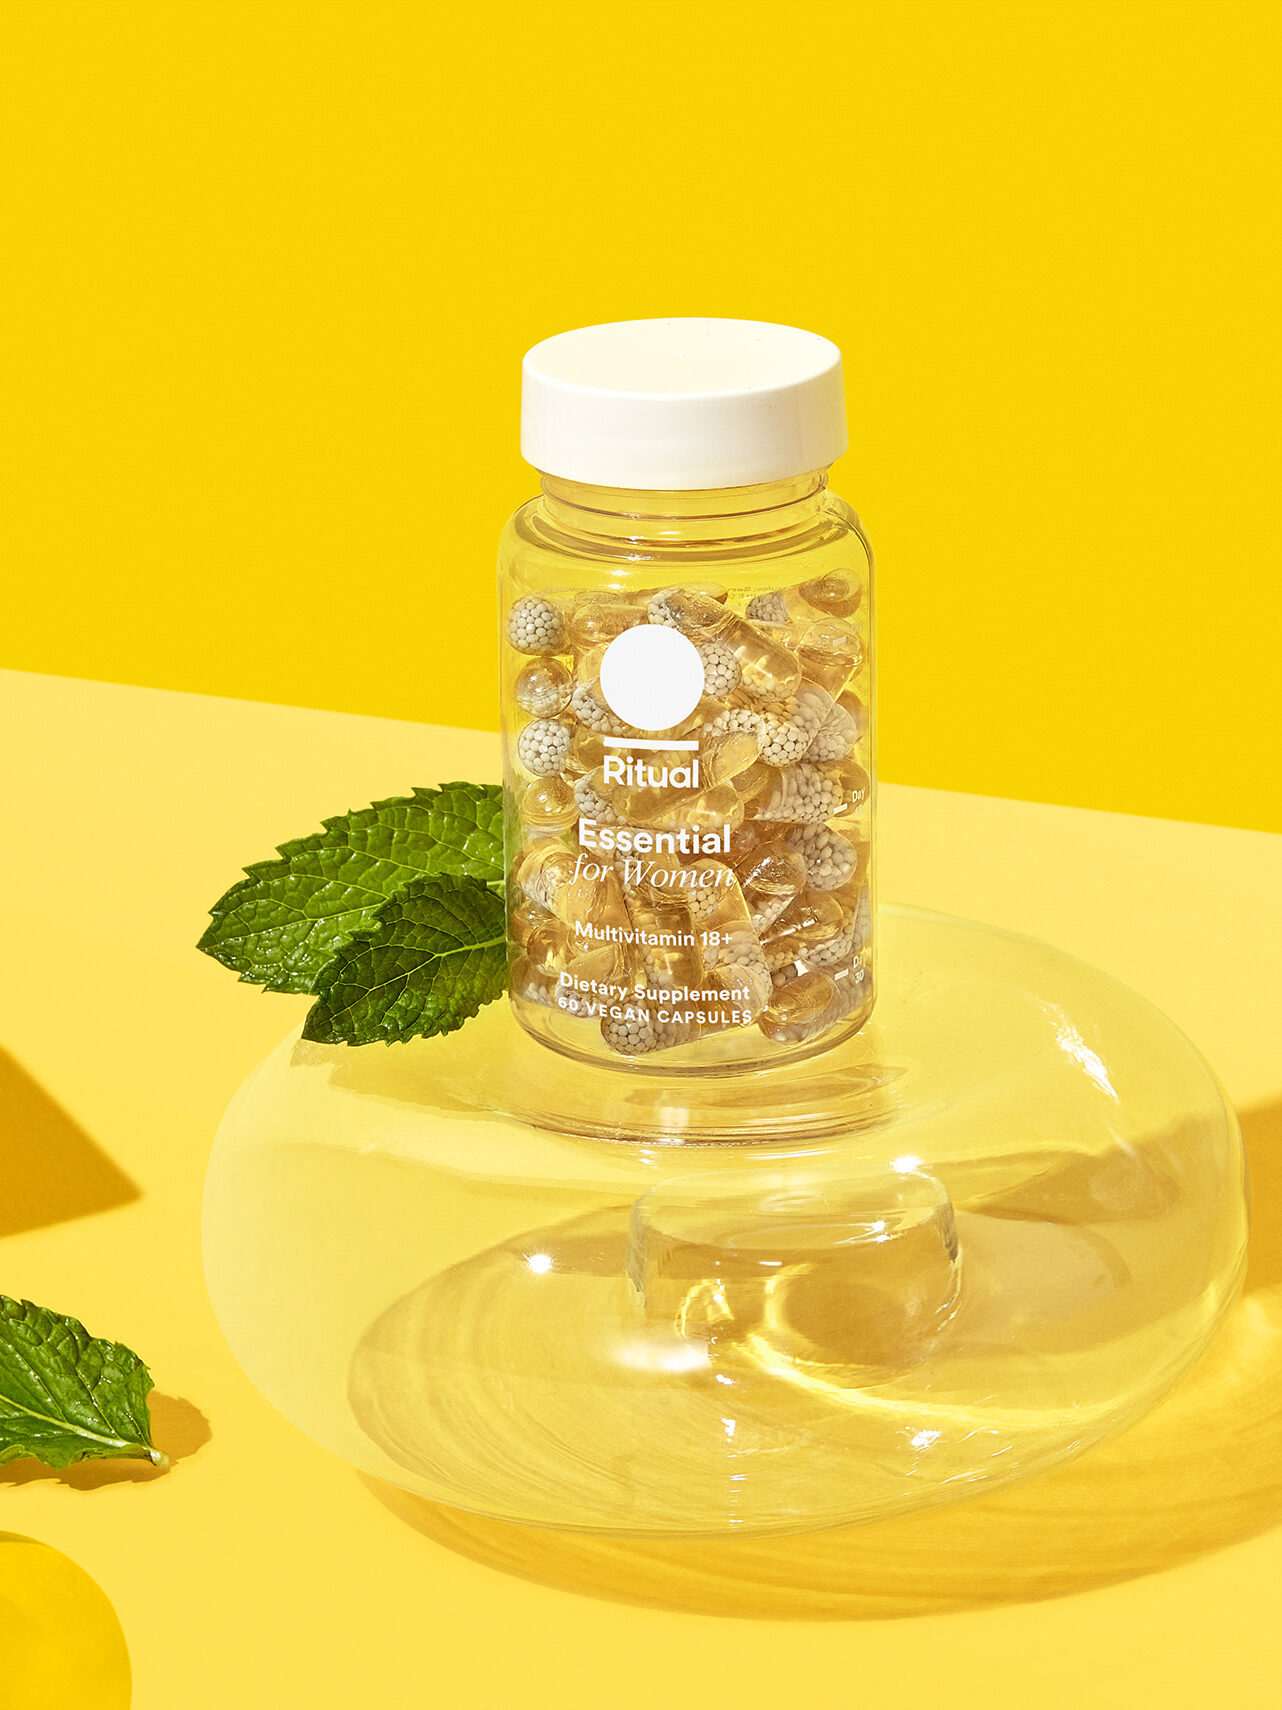 A bottle of Ritual Essential For Women Multivitamins in front of a yellow background.